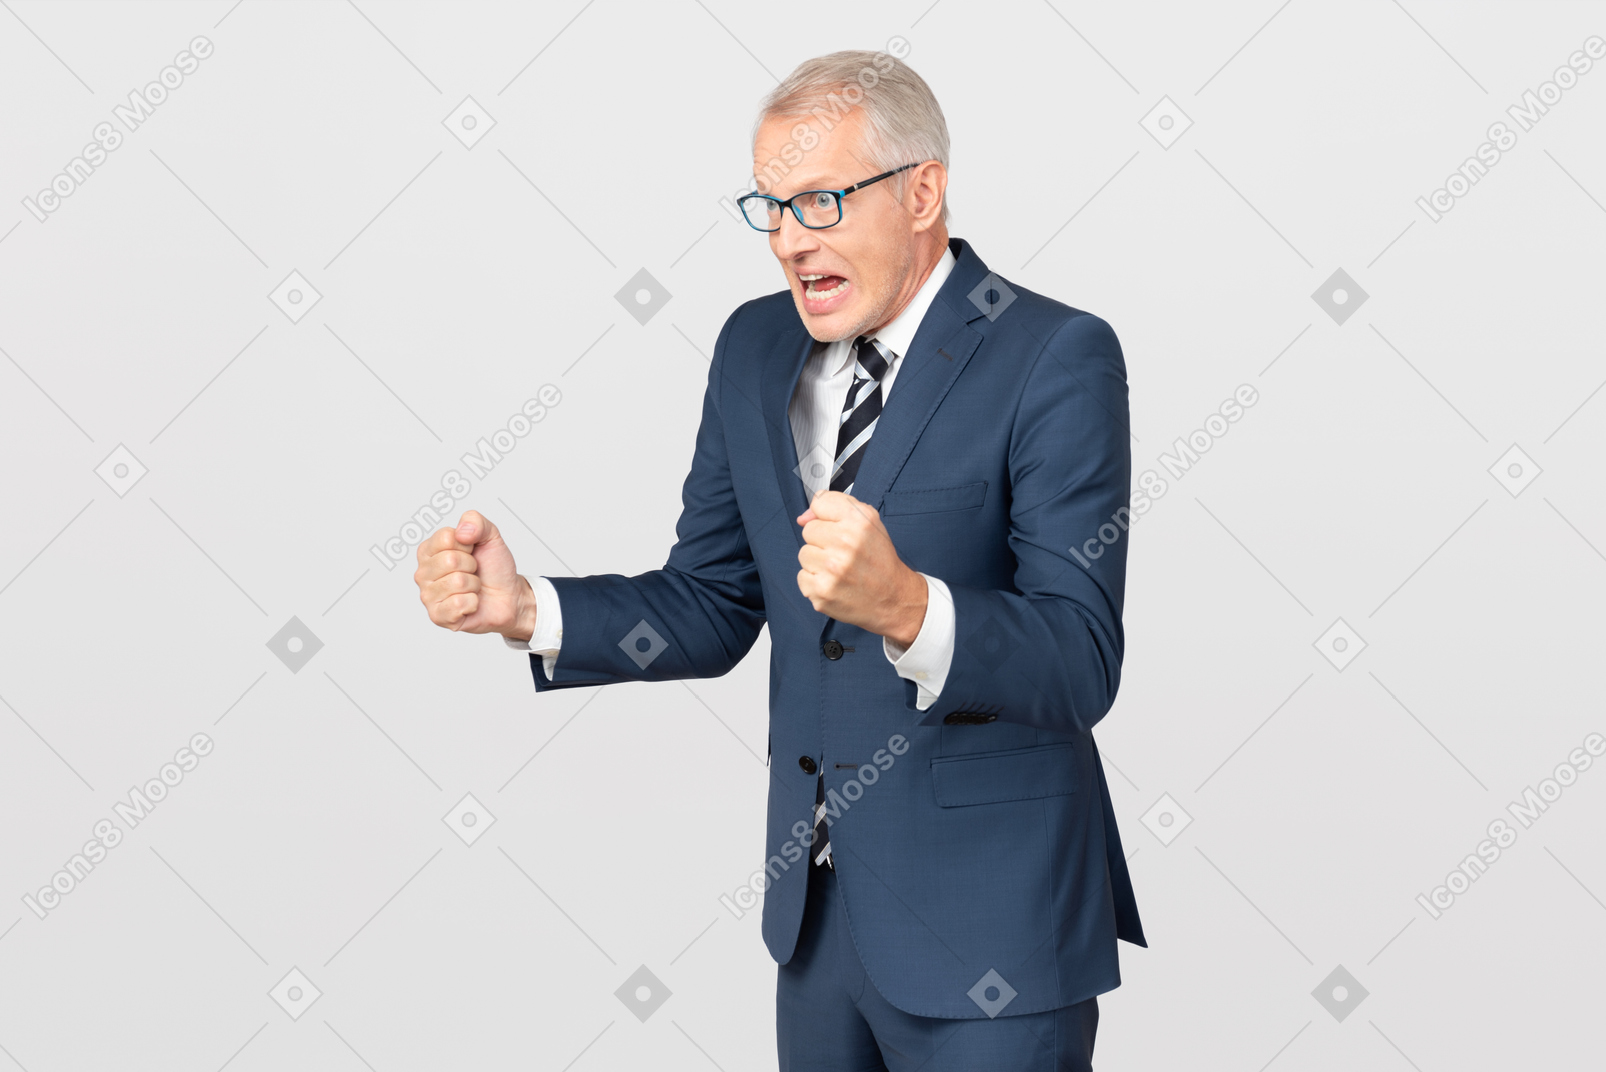 Angry mature businessman holding clenched fists up